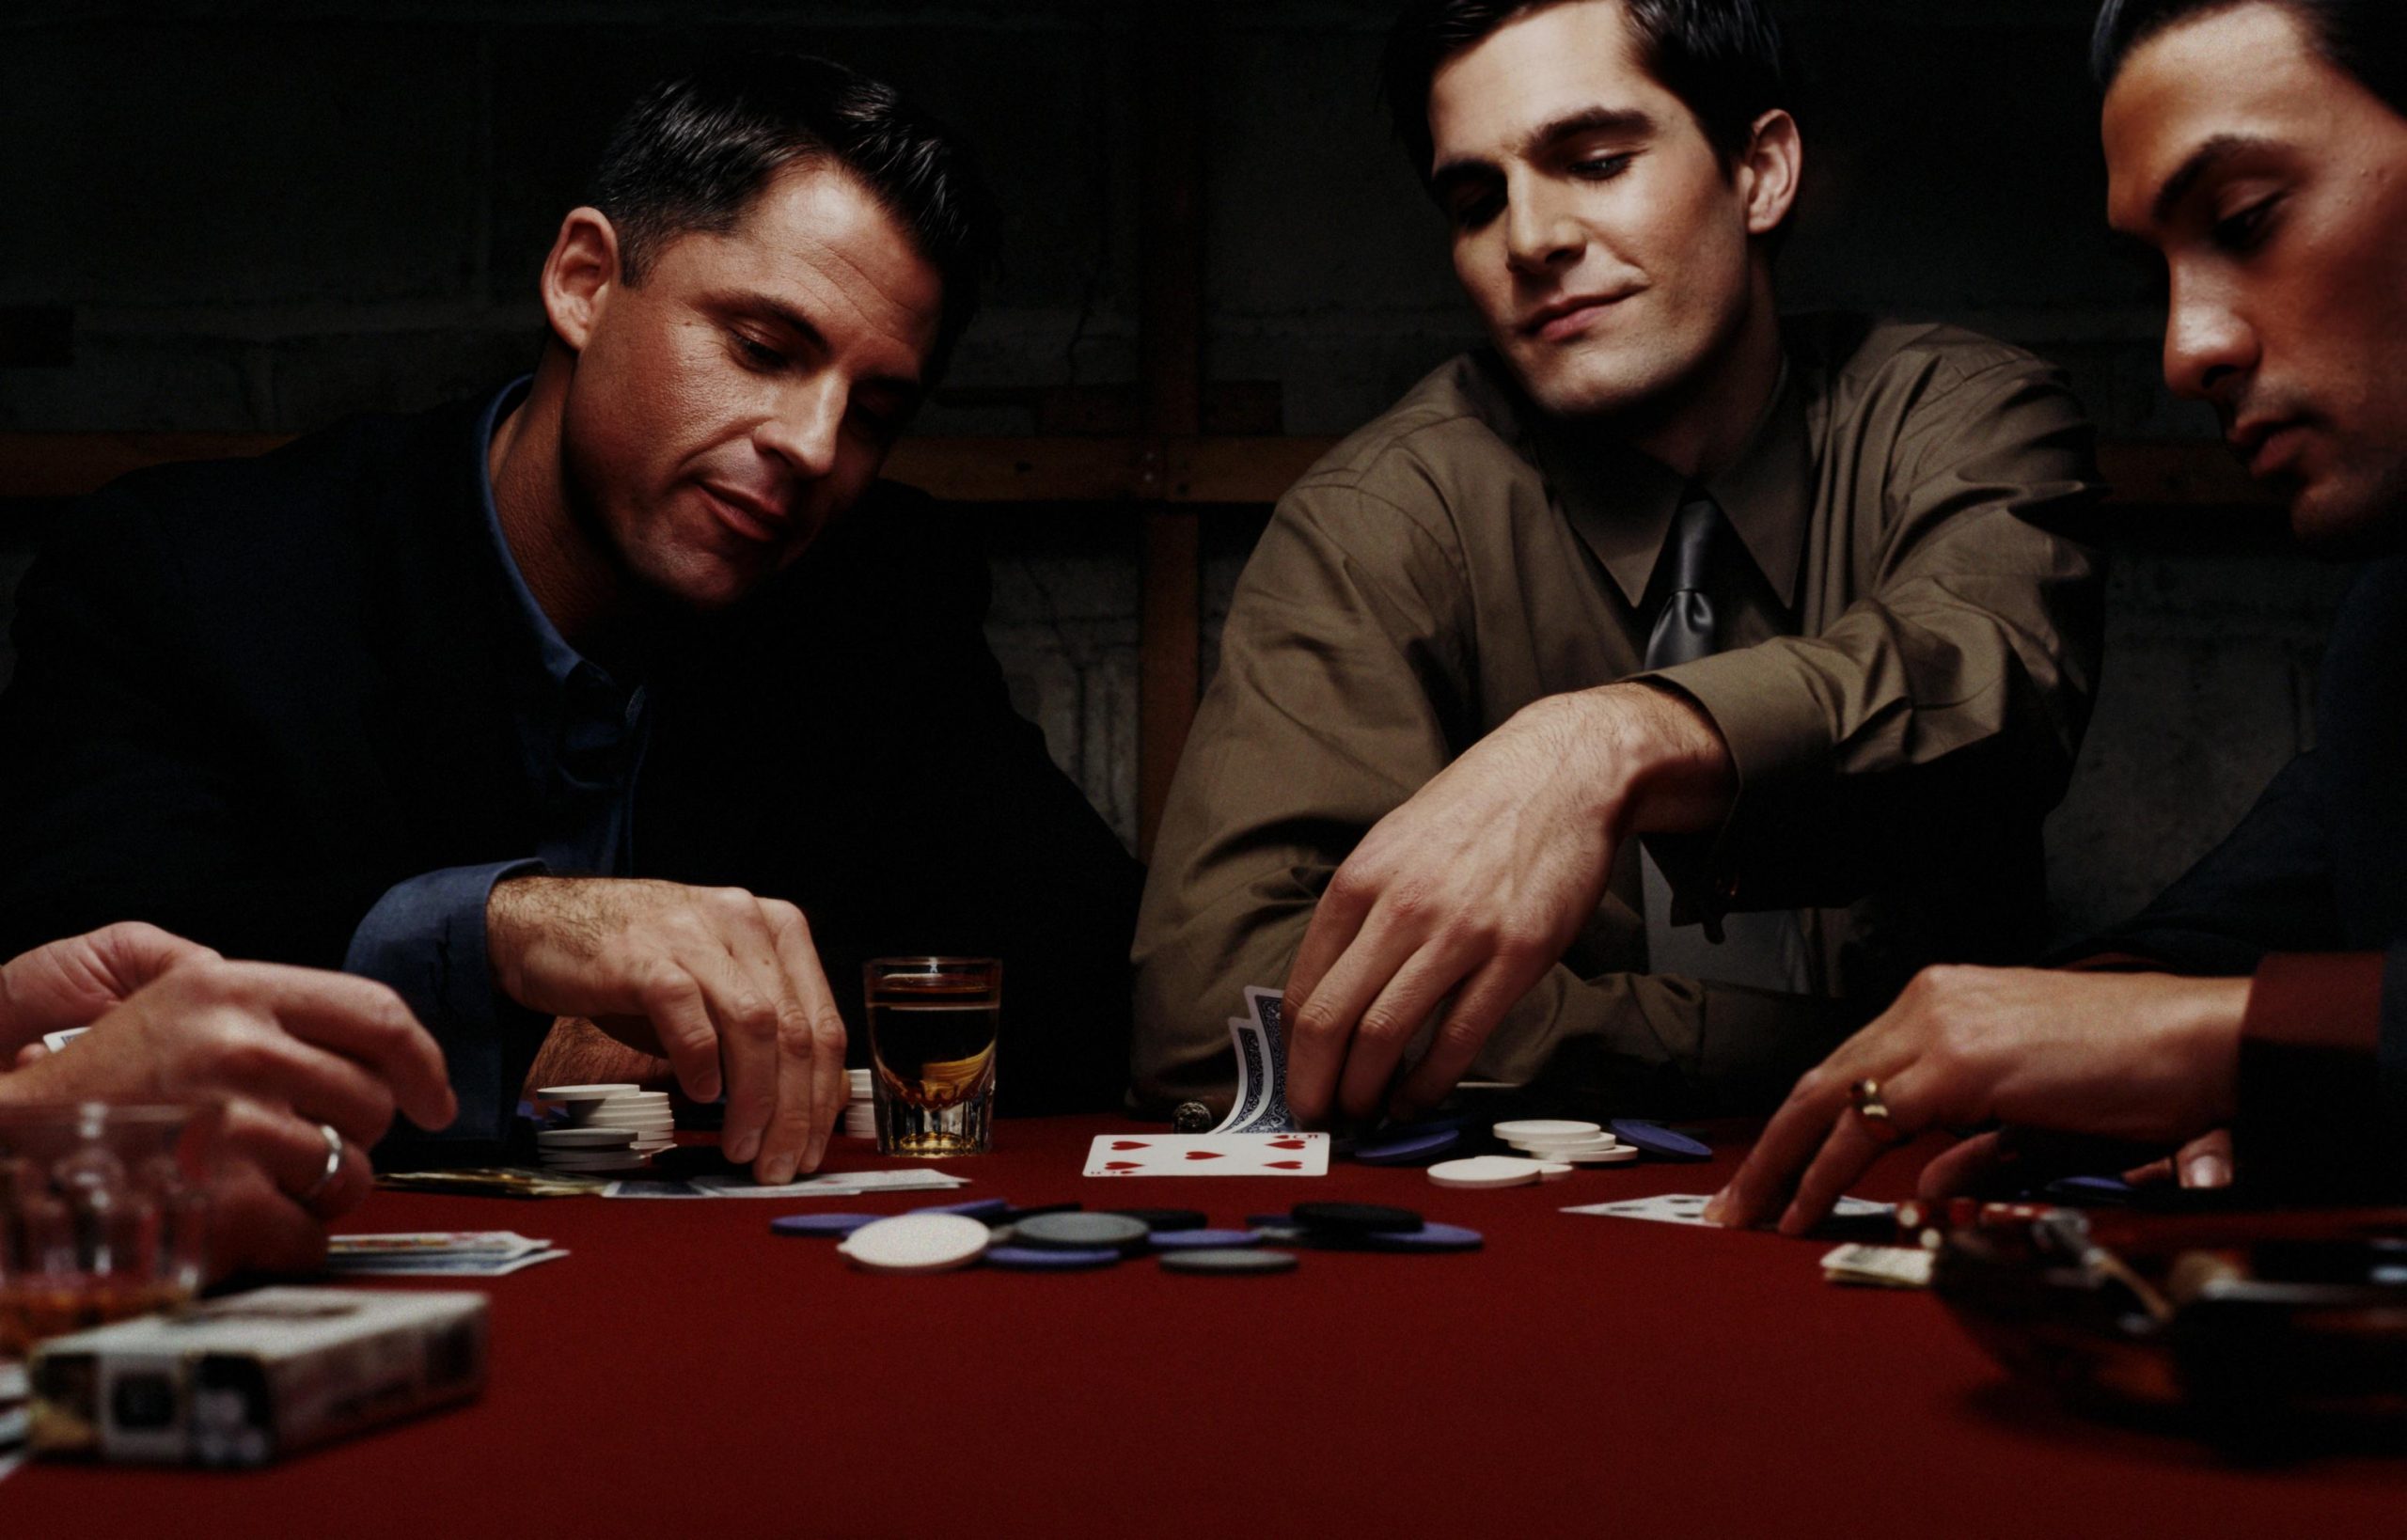 Are You Gambling With Your Agency Partners? Four Lessons To Build Strong Partnerships